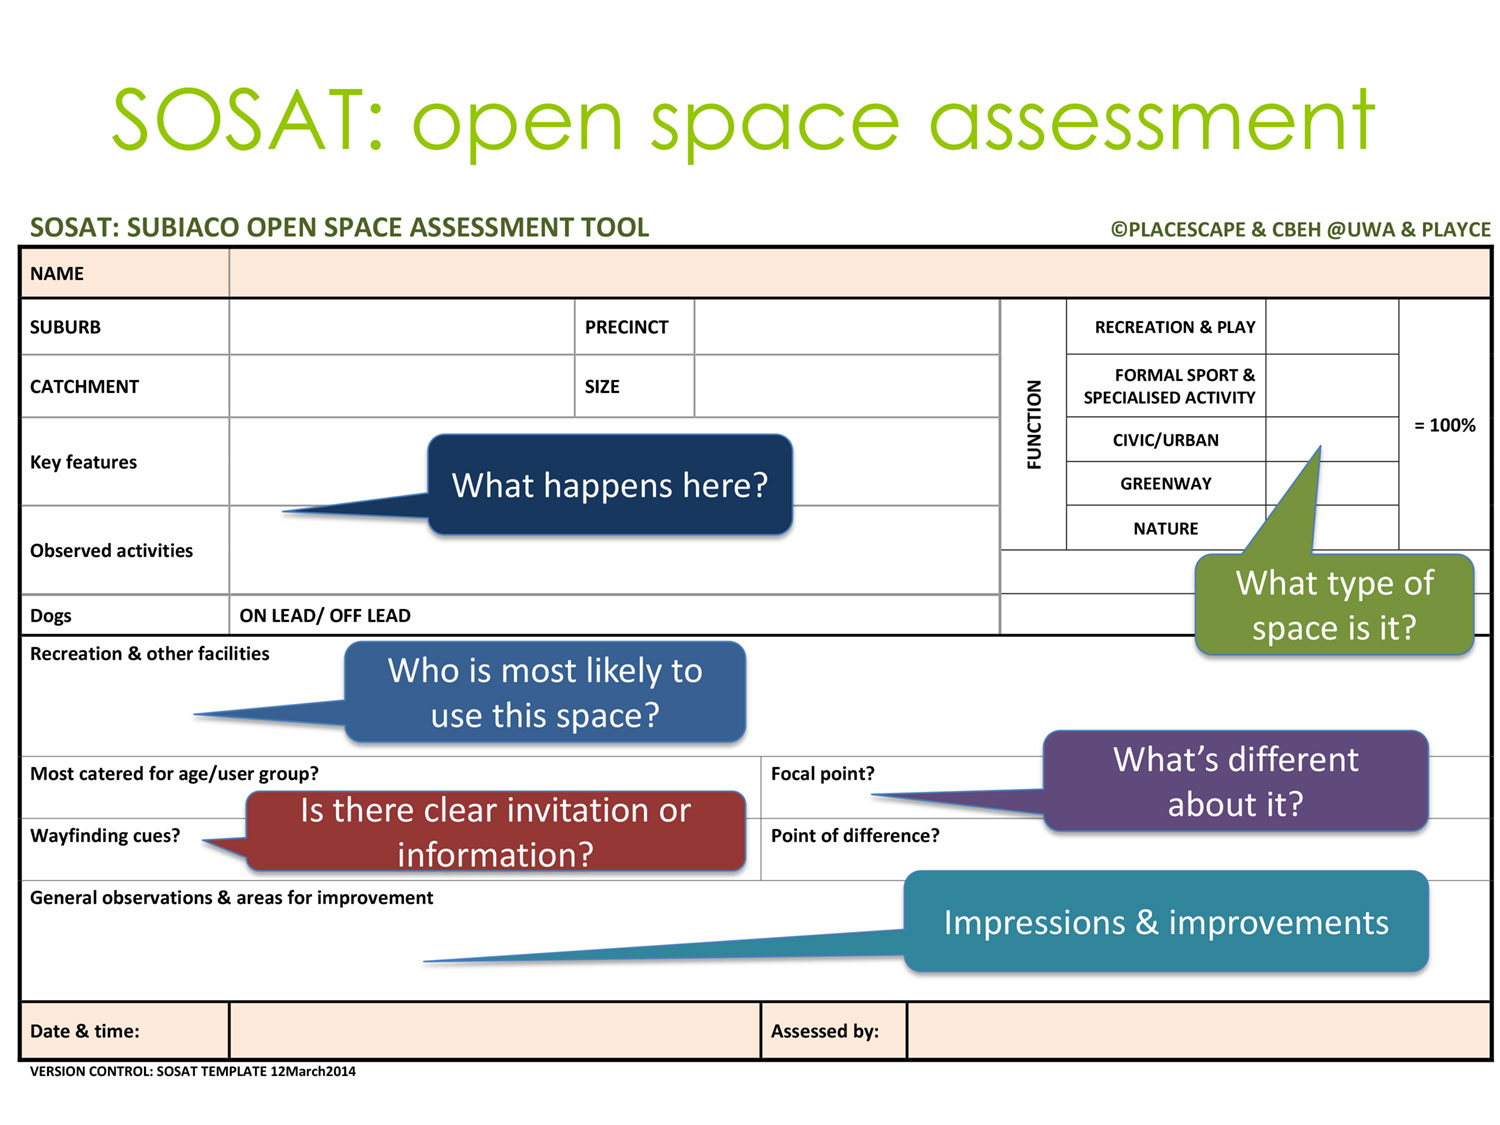 Subiaco Open Space Assessment Tool visual example